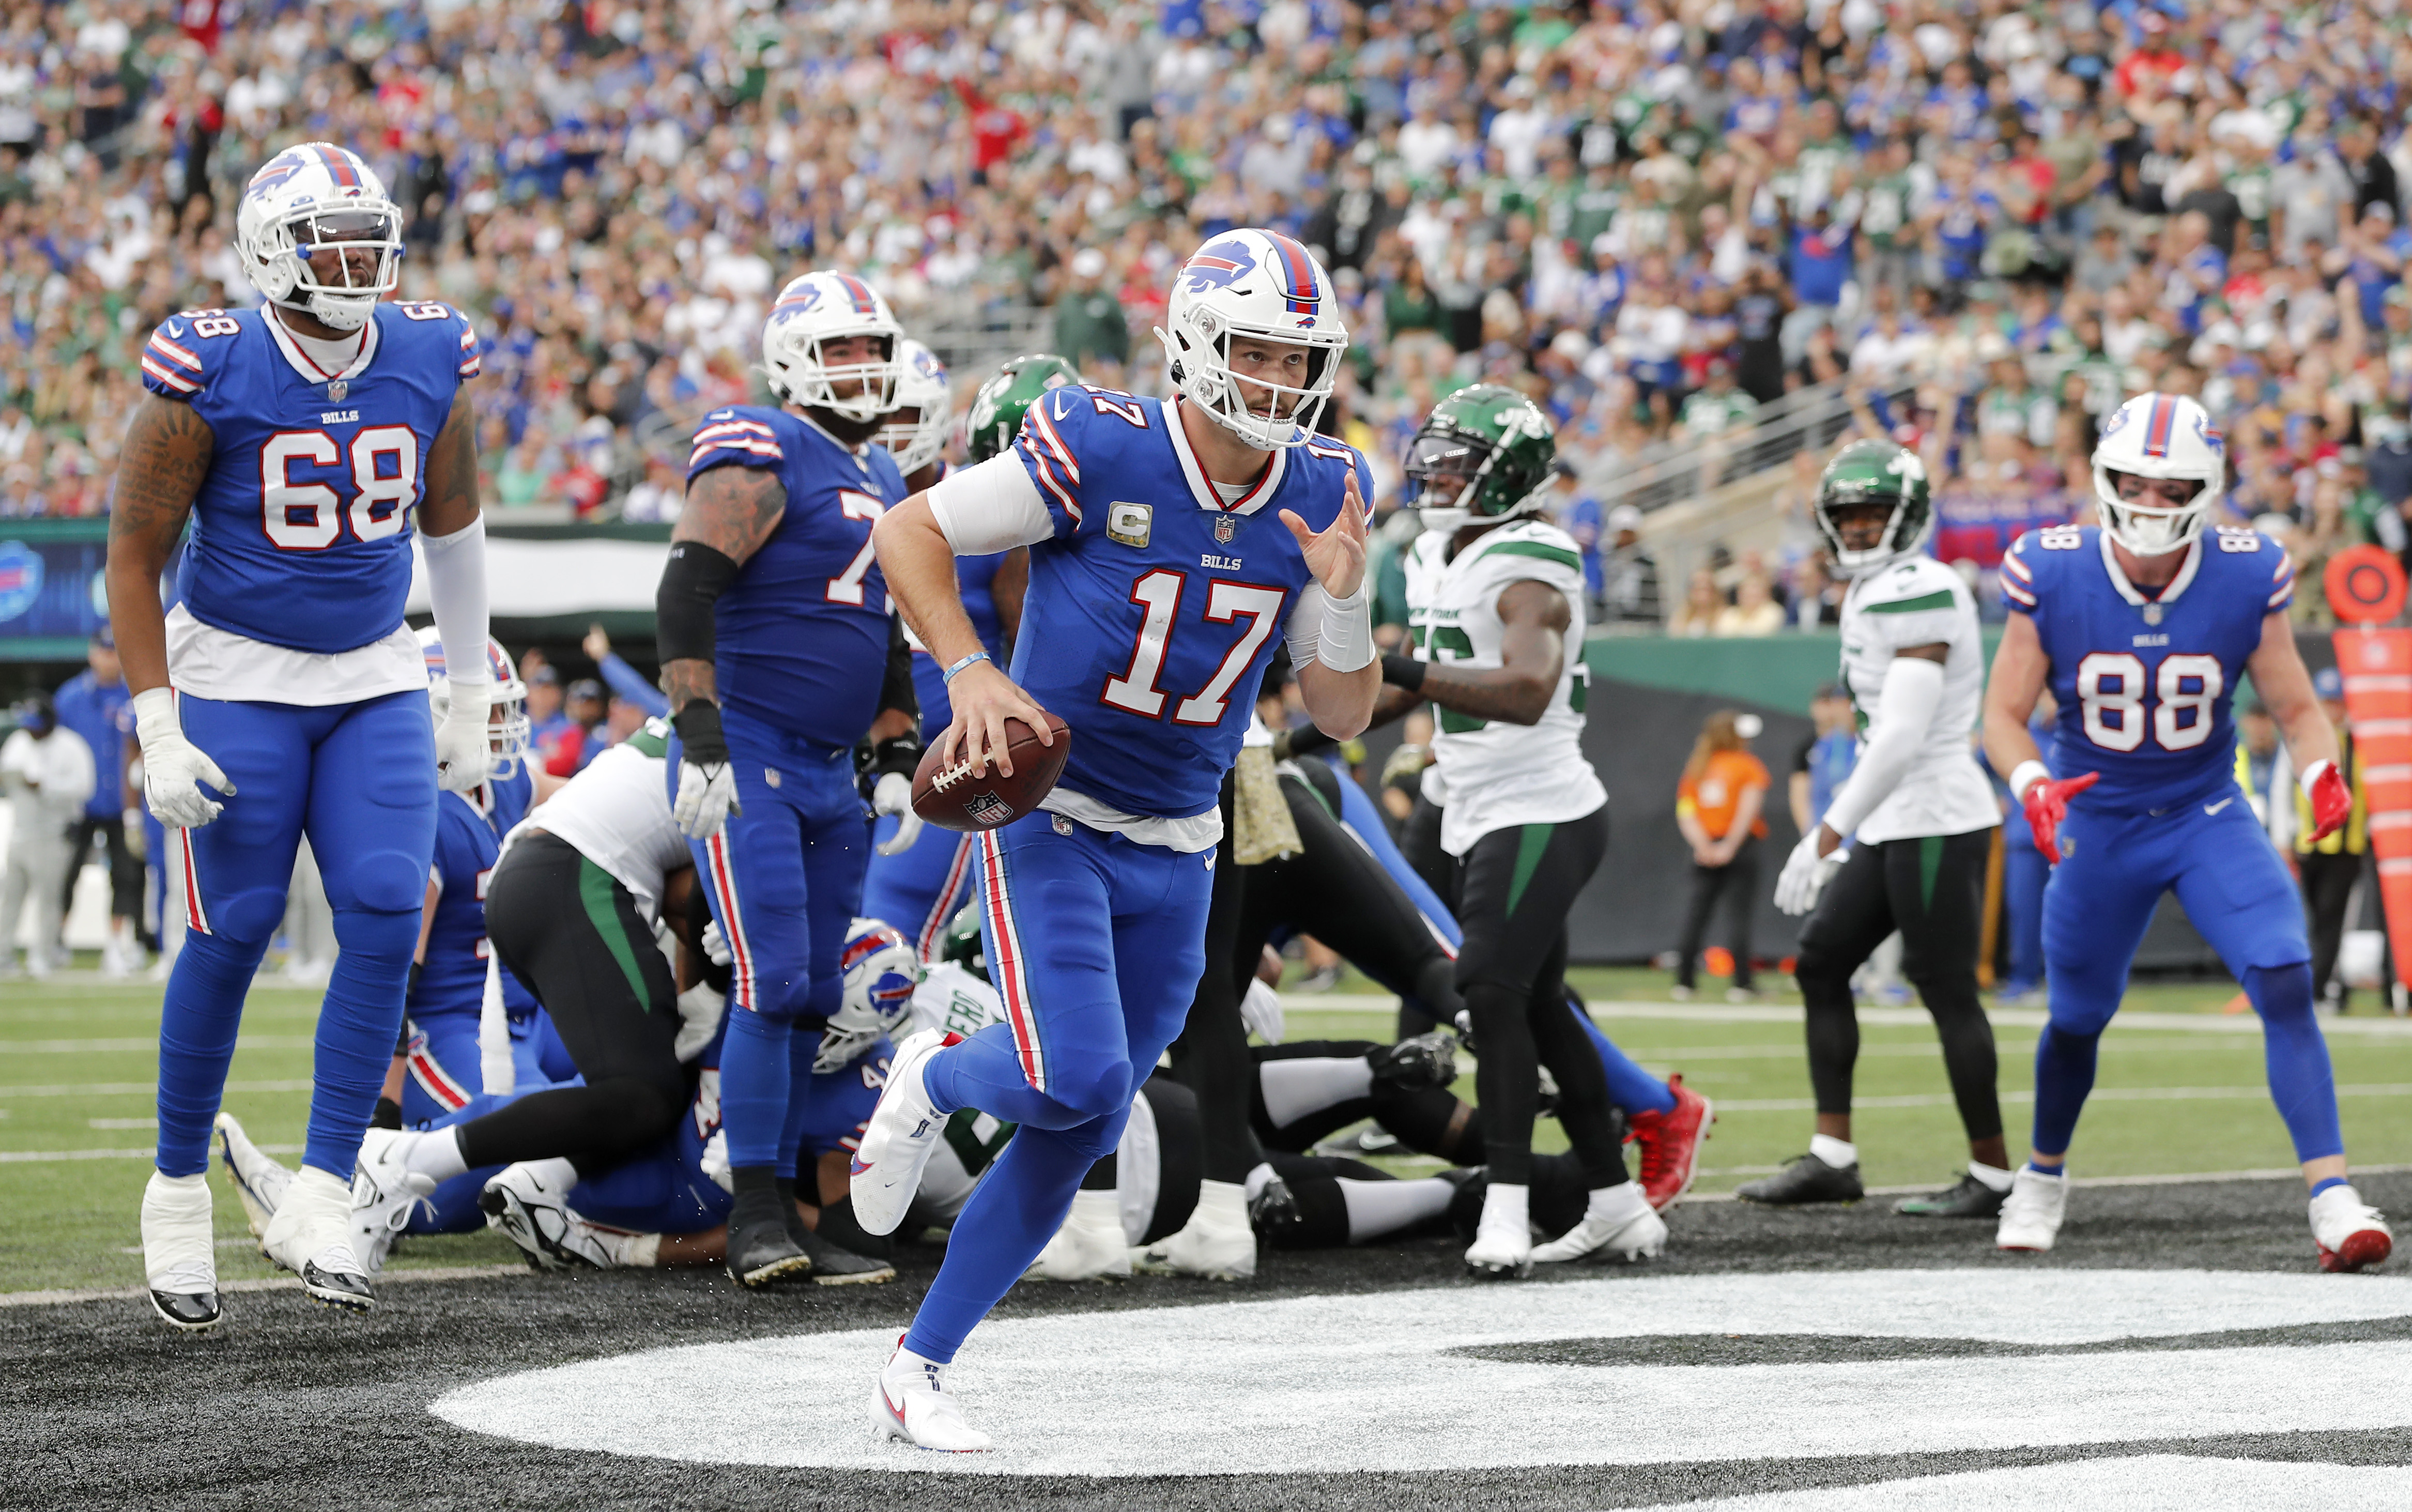 Josh Allen #17 of the Buffalo Bills runs in a touchdown against the New York Jets at MetLife Stadium on November 06, 2022 in East Rutherford, New Jersey.